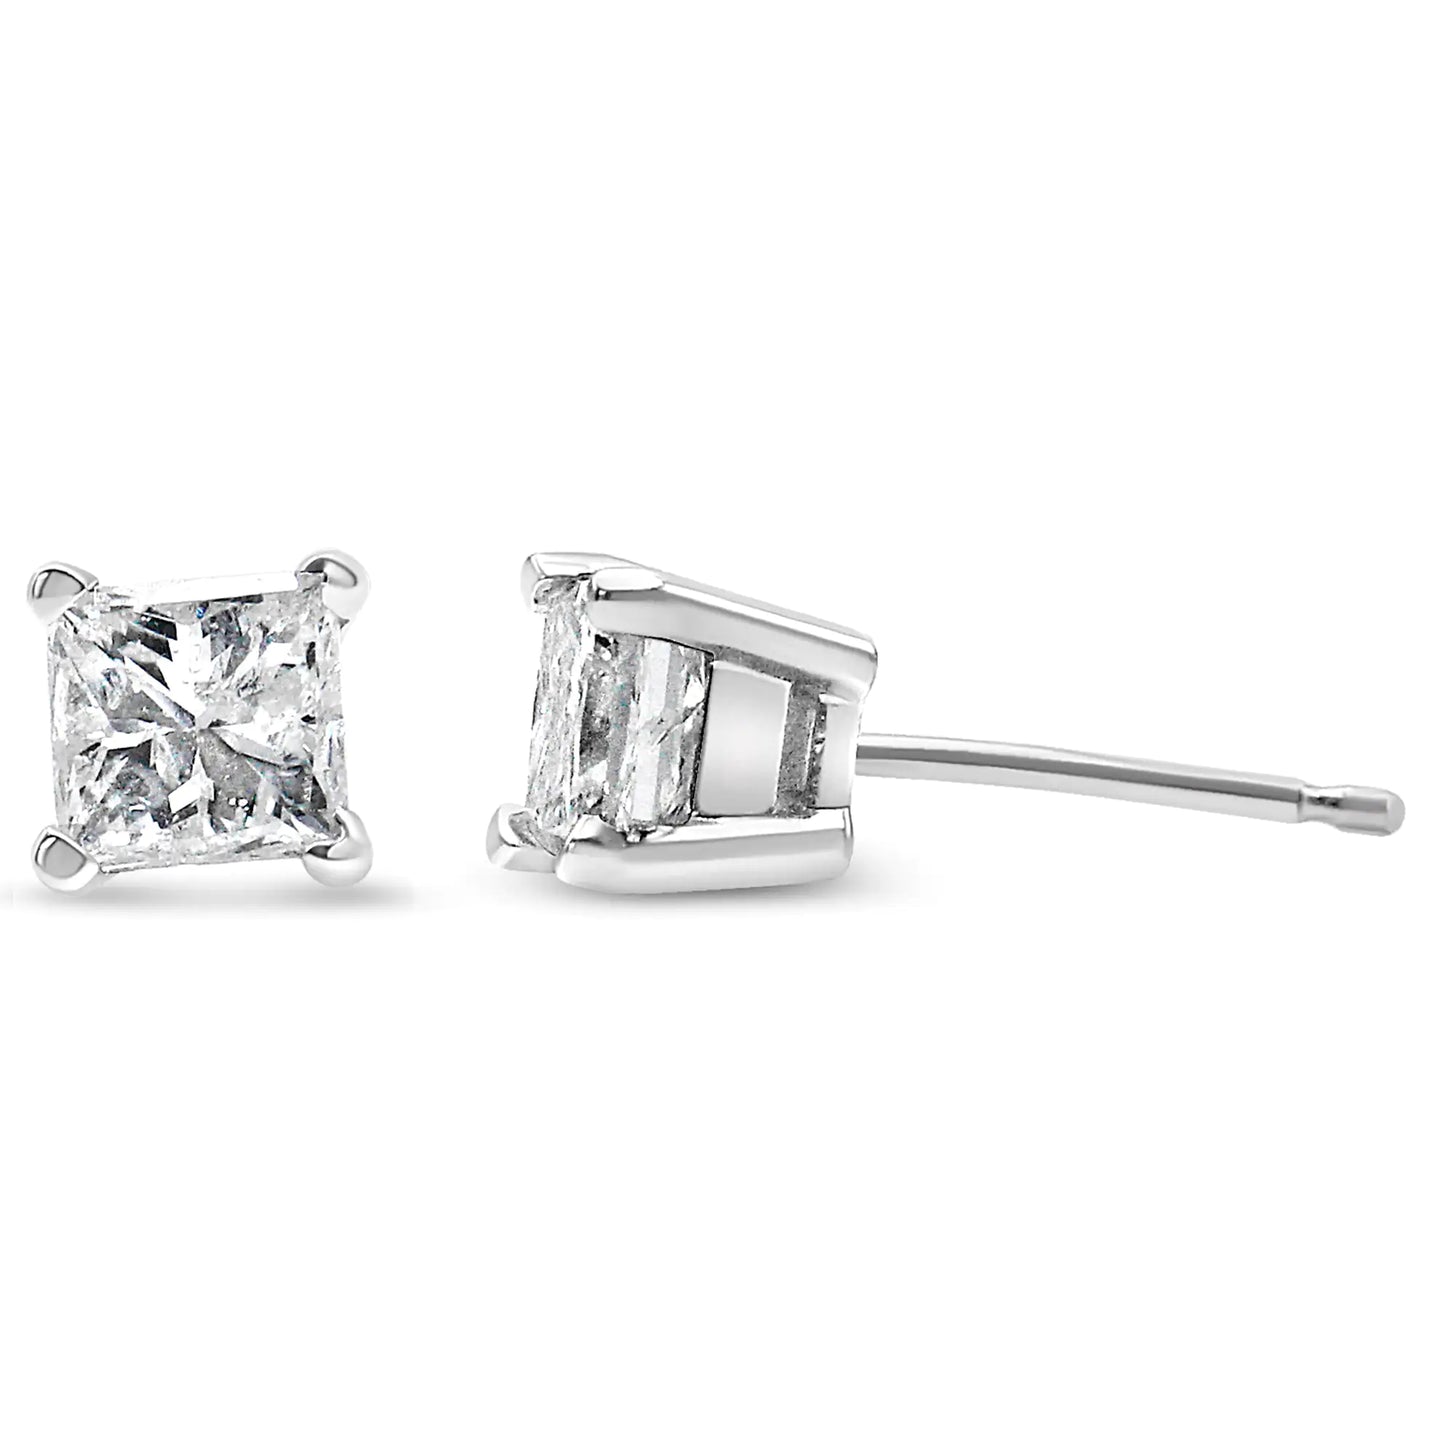 AGS Certified 14k Gold 4-Prong Set Princess-Cut Solitaire Diamond Push Back Stud Earrings (I-J Color, SI2-I1 Clarity)